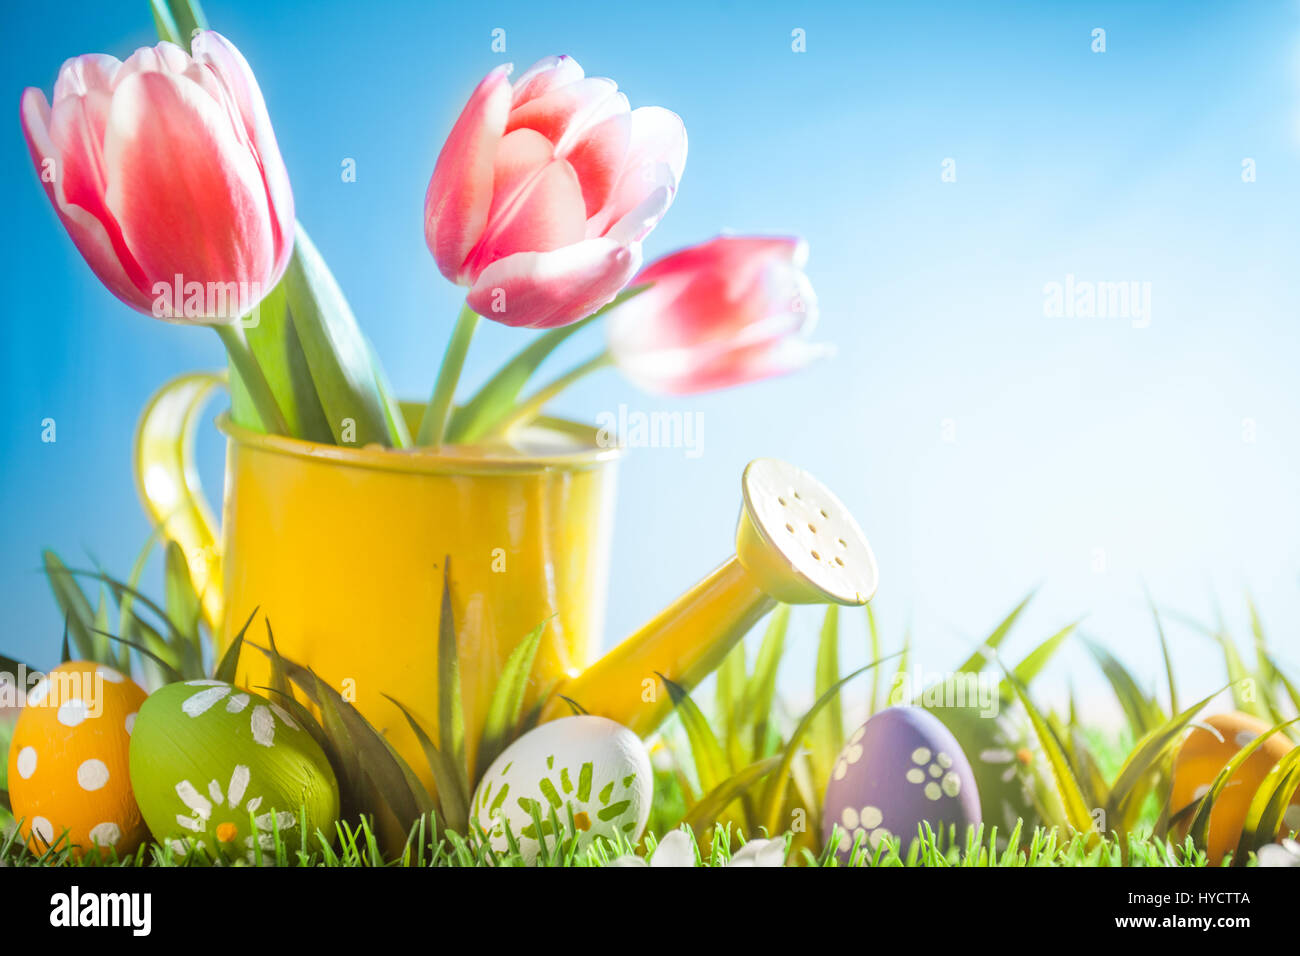 Easter holiday with tulip flowers and egg in grass Stock Photo